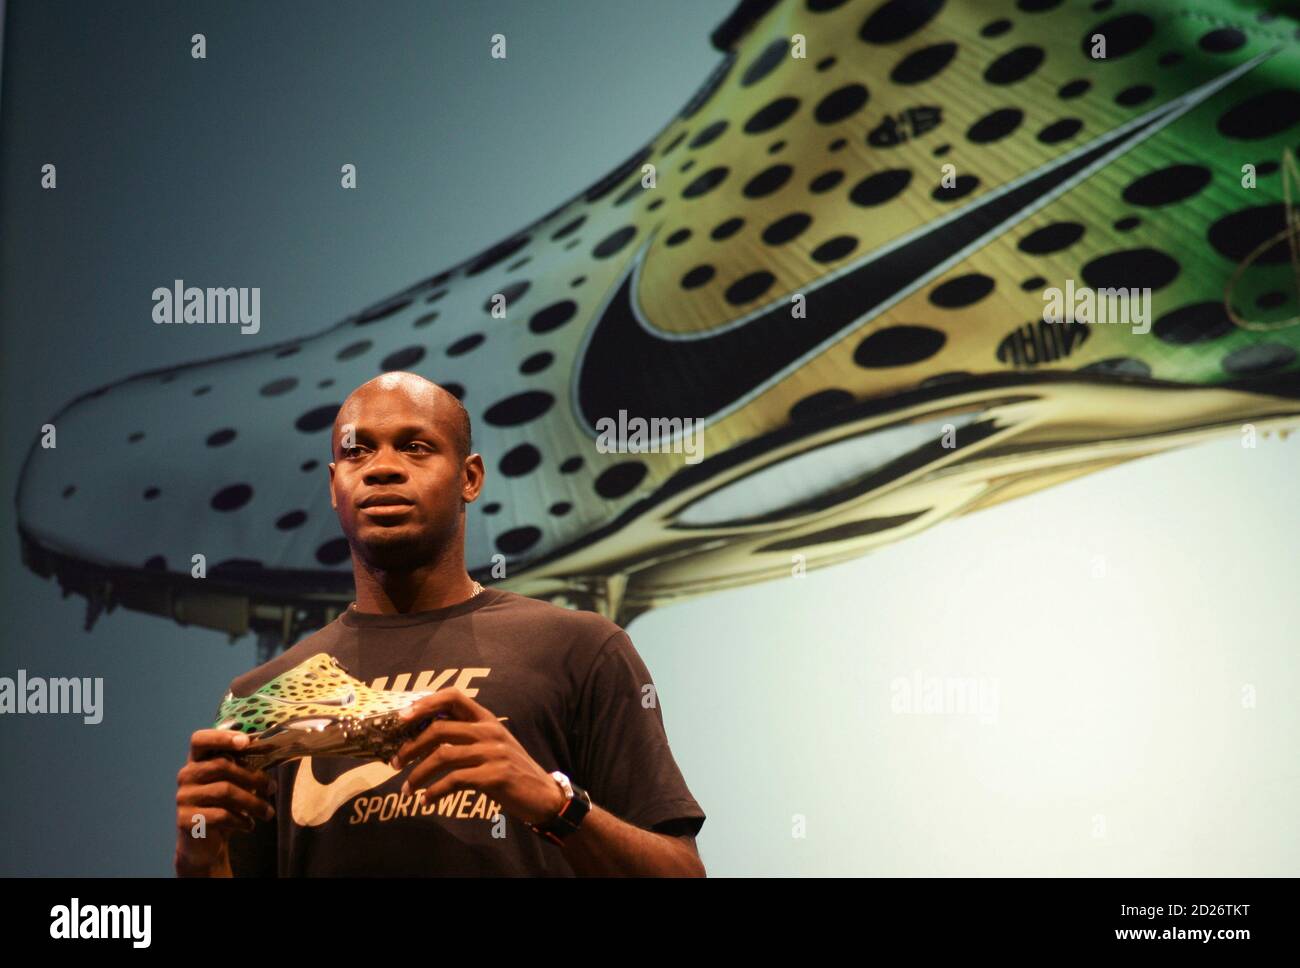 Sprinter Asafa Powell of Jamaica displays the Nike Zoom Aerofly during a  promotional event in Beijing August 12, 2008. Former world record holder  Powell says Jamaican compatriot Usain Bolt and American world